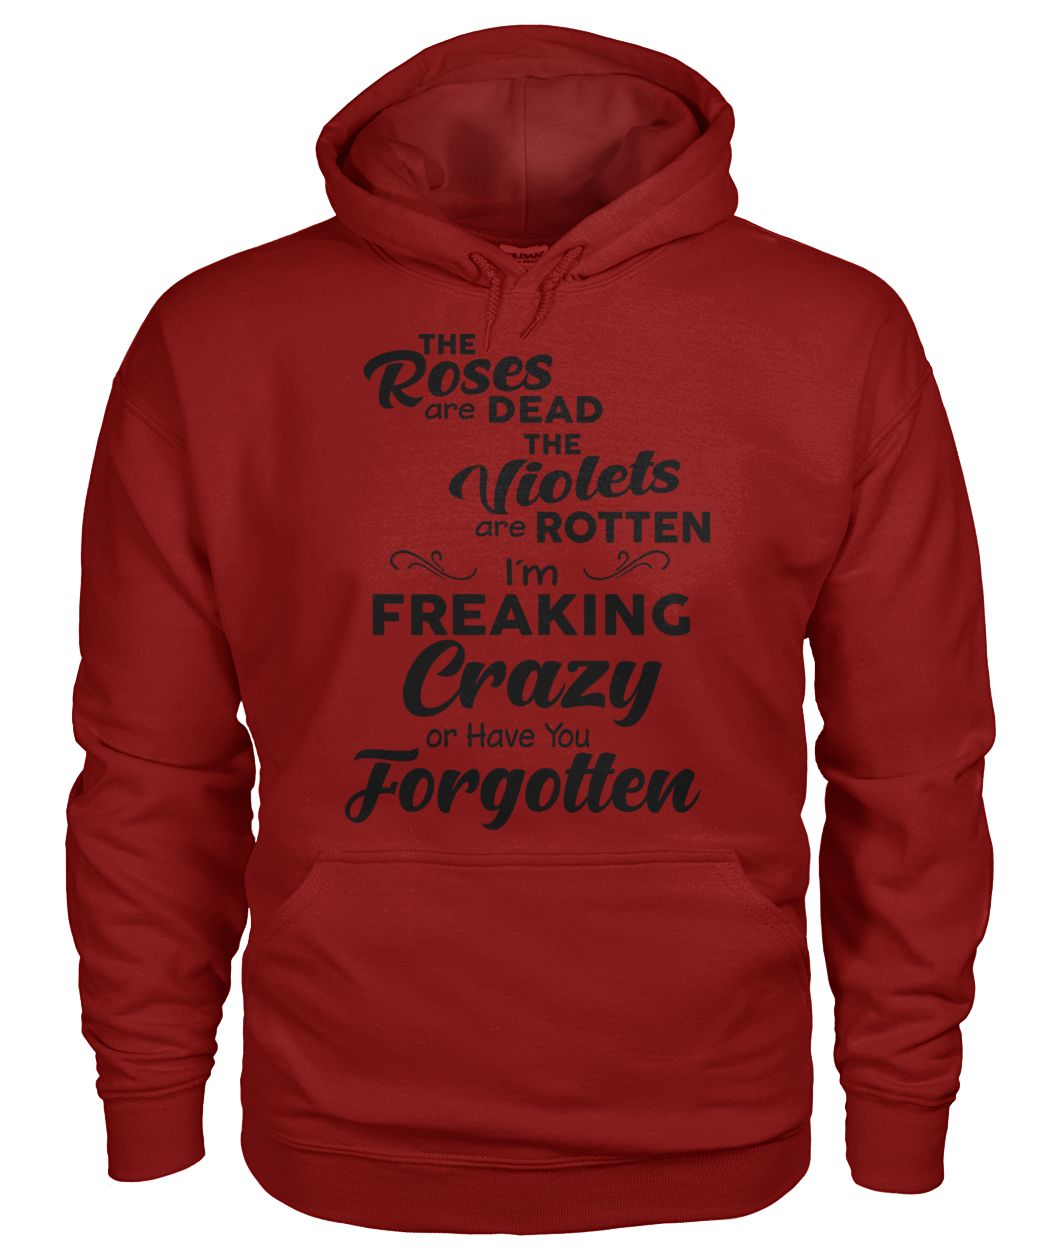 The roses are dead the violets are rotten I'm freaking crazy or have you forgotten gildan hoodie